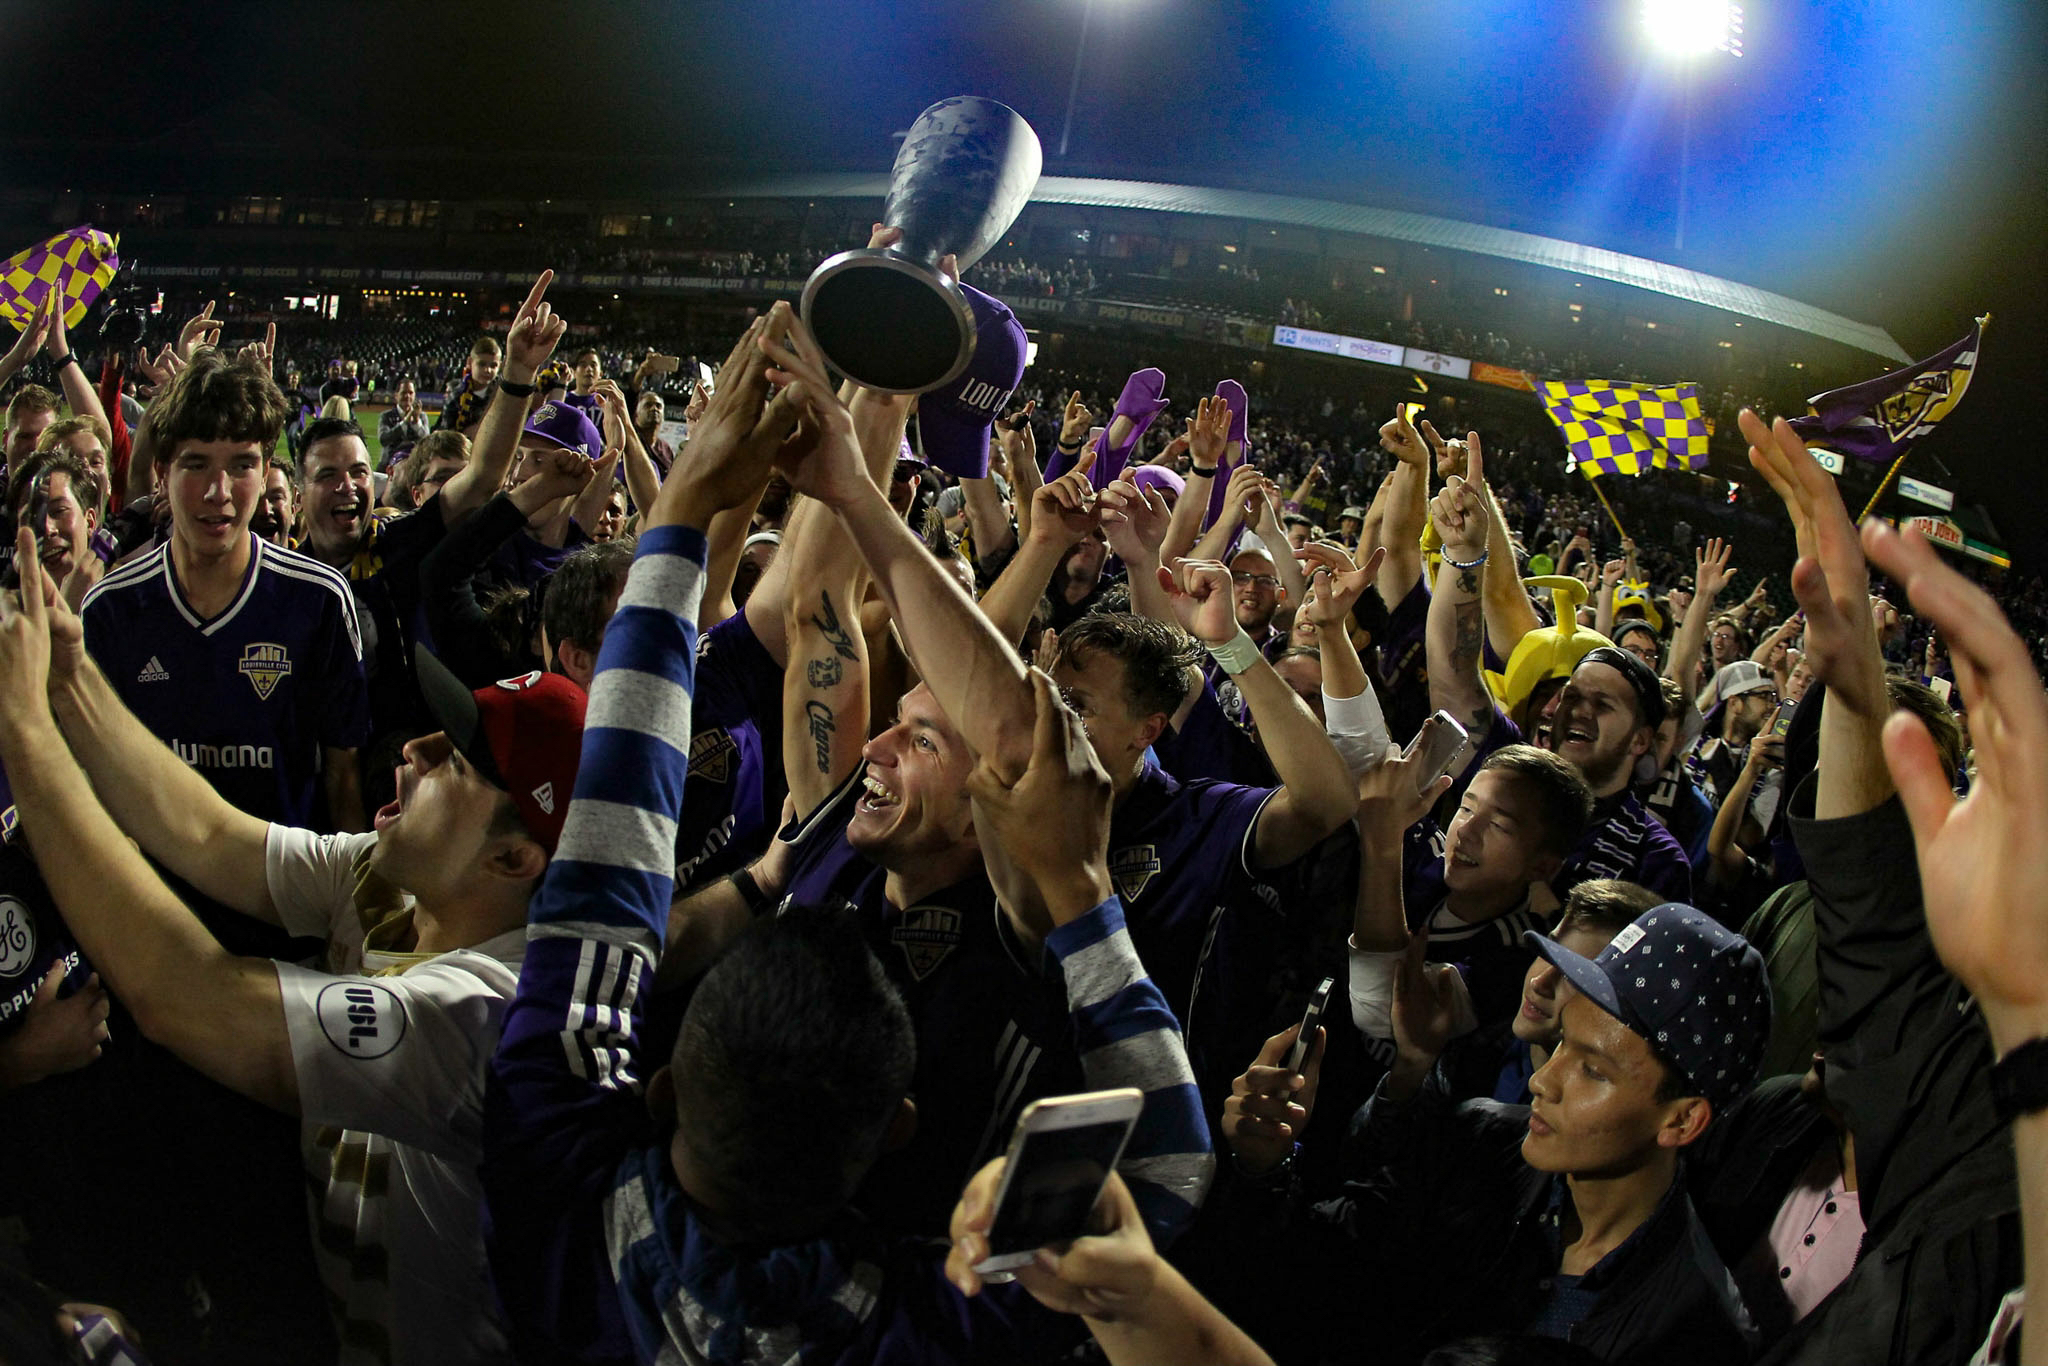 Coopers and Louisville City lifting the USL trophy